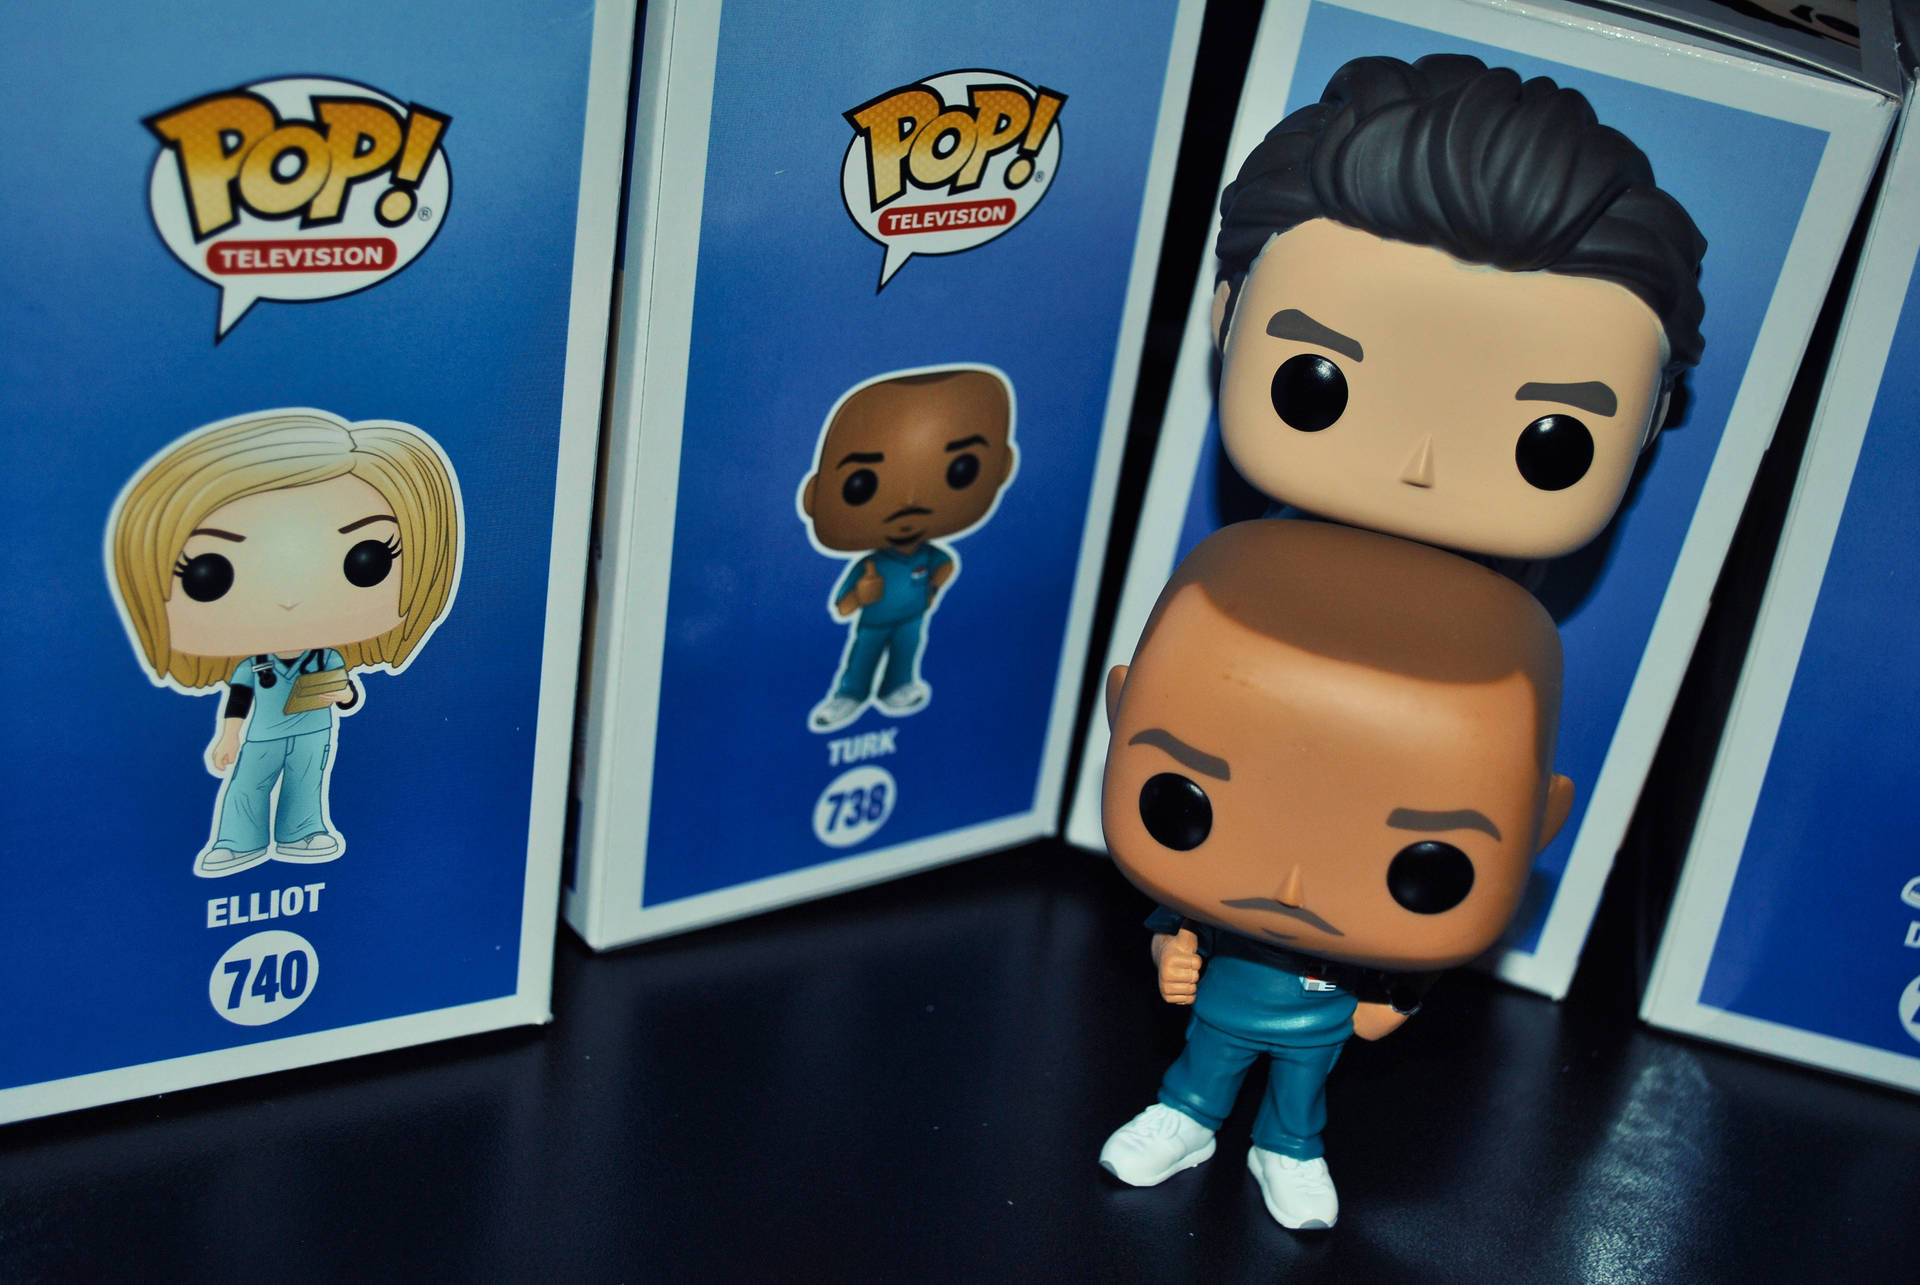 Caption: Funko Pop's JD and Turk Figurines Inspired by Scrubs TV Show Wallpaper